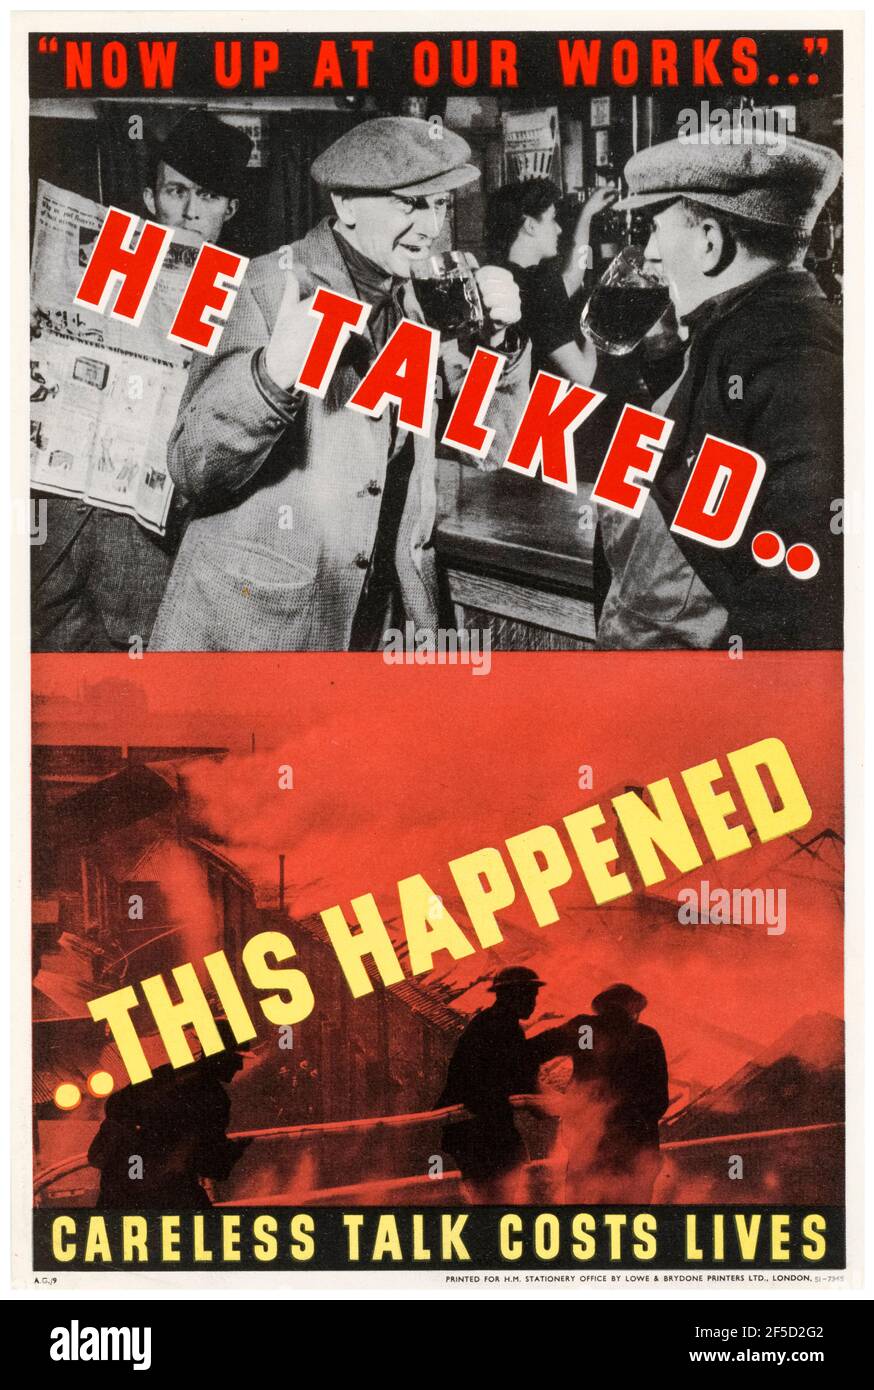 Er sprach: This Happened: Careless Talk Costs Lives, British, WW2 Public Information Poster, 1942-1945 Stockfoto